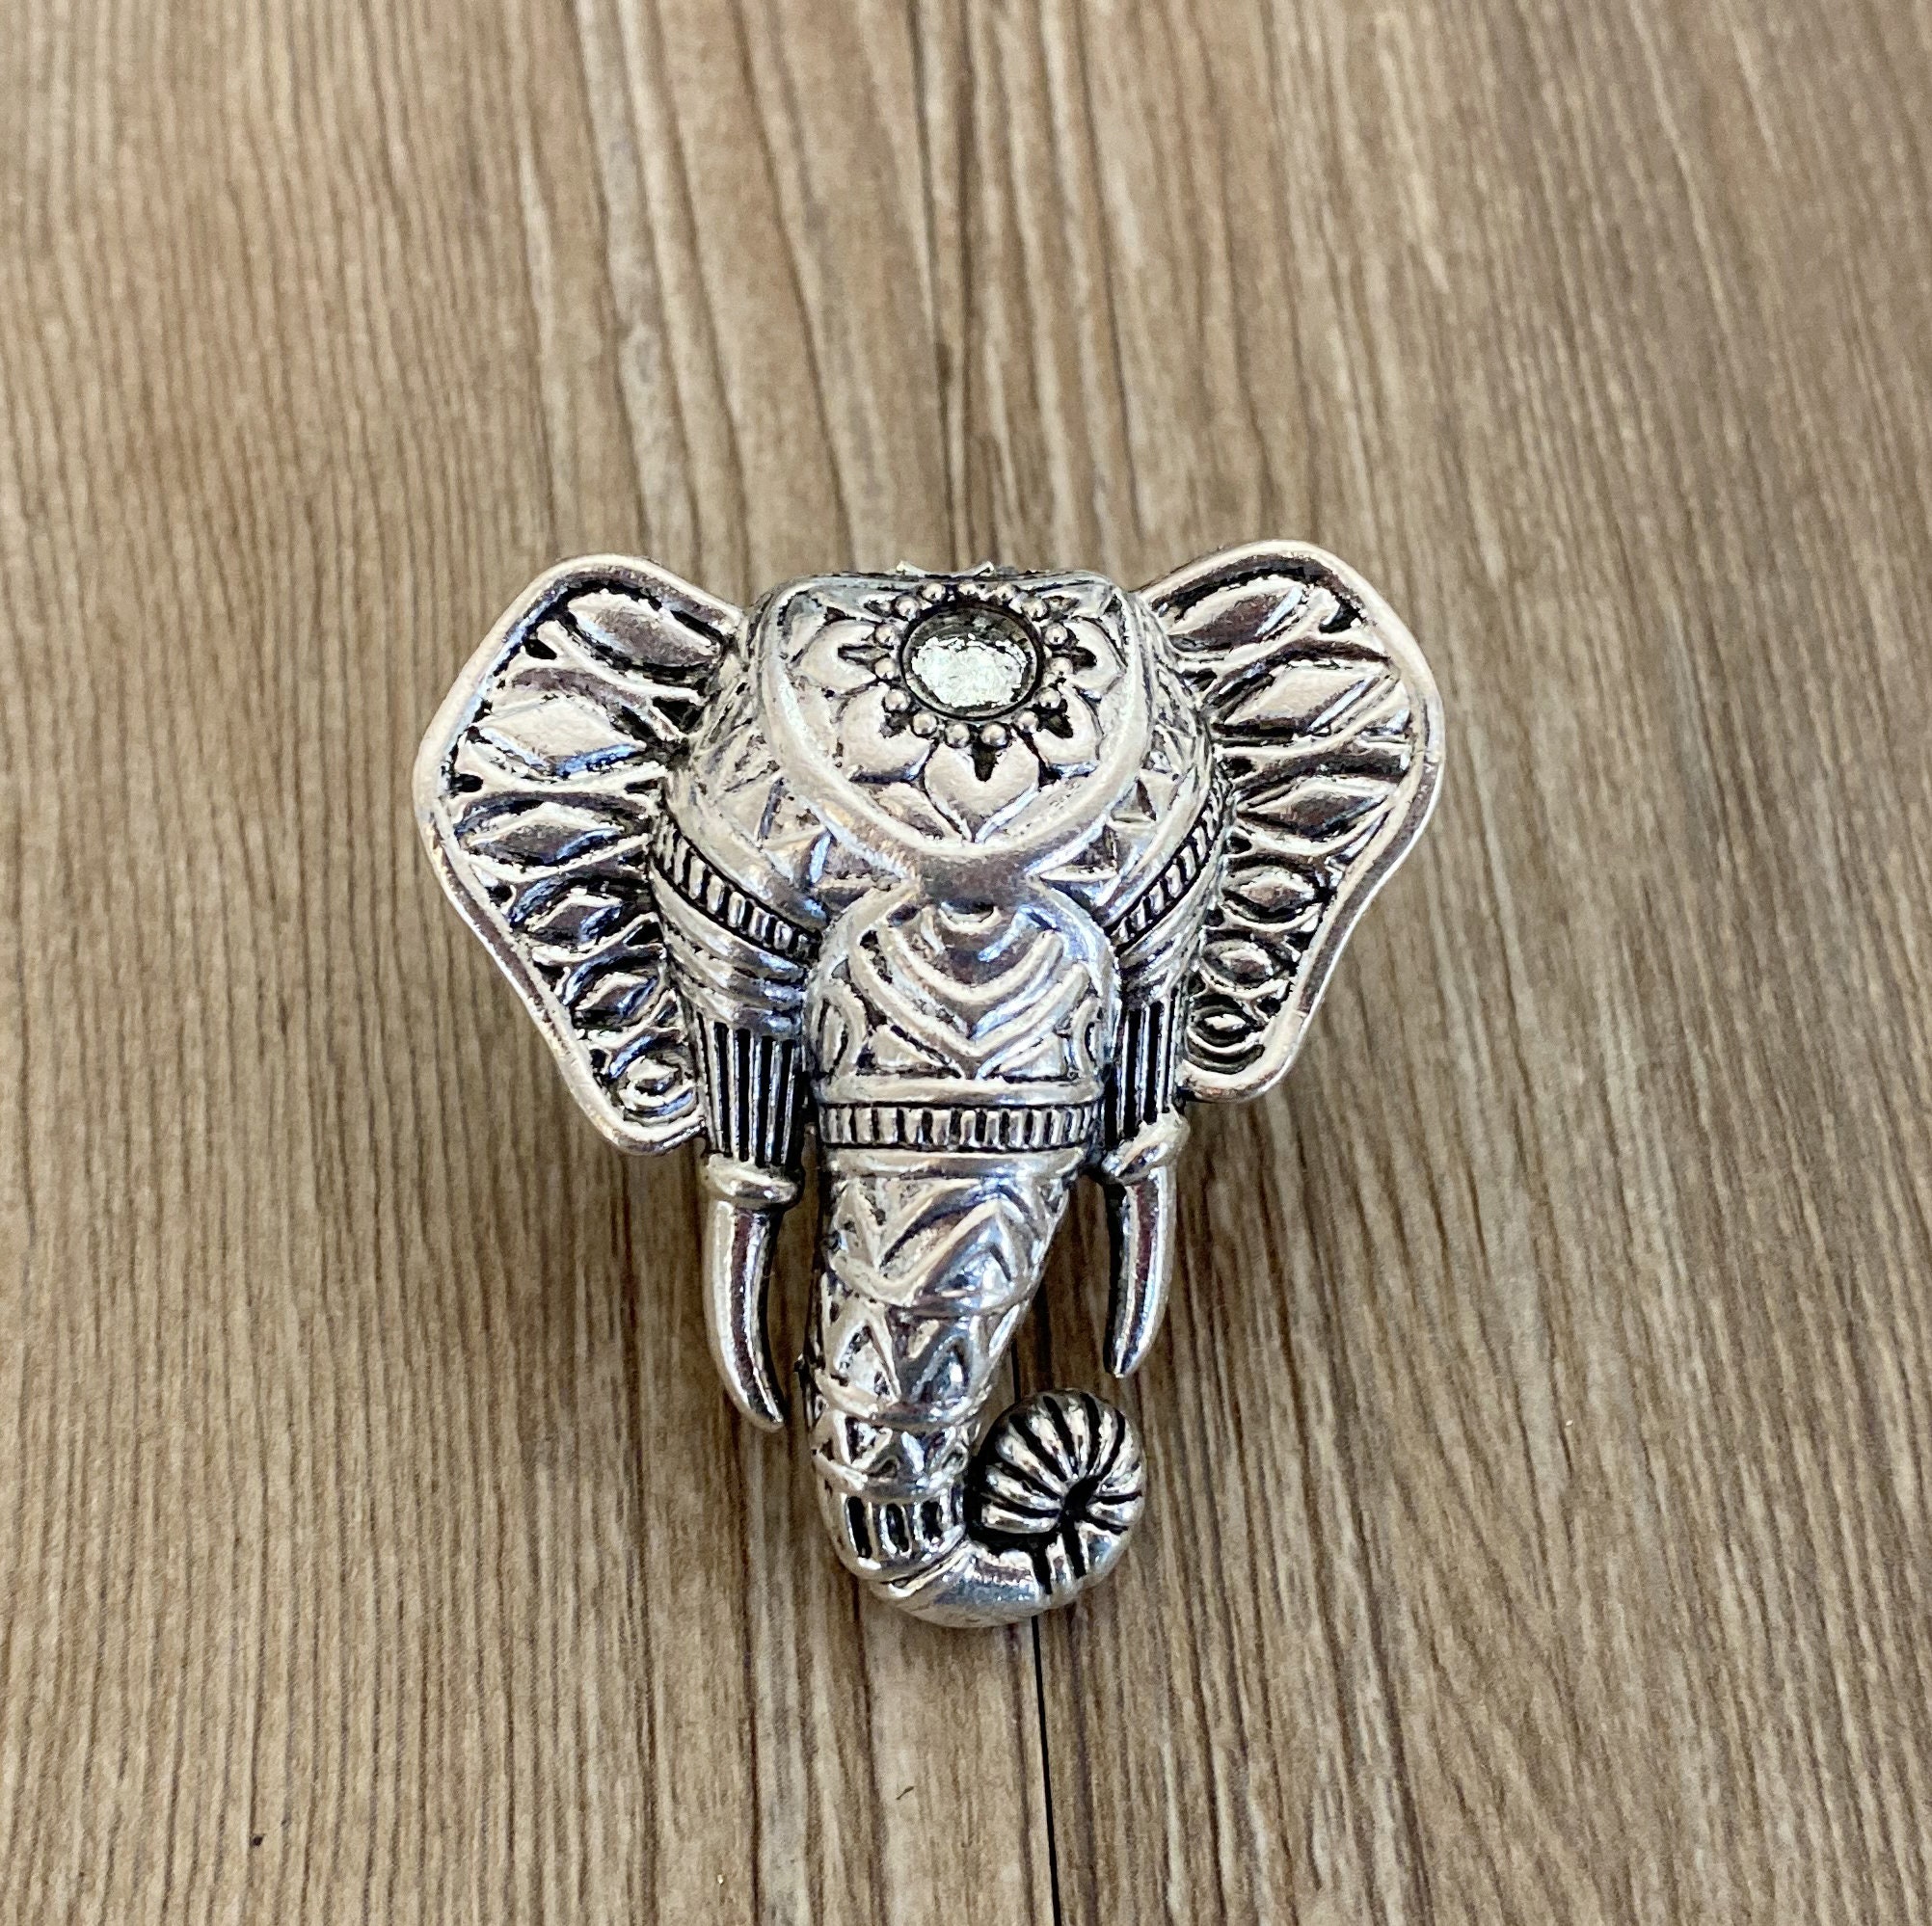 Silver Elephant drawer knobs / Elephant Cabinet / Gothic Home | Etsy